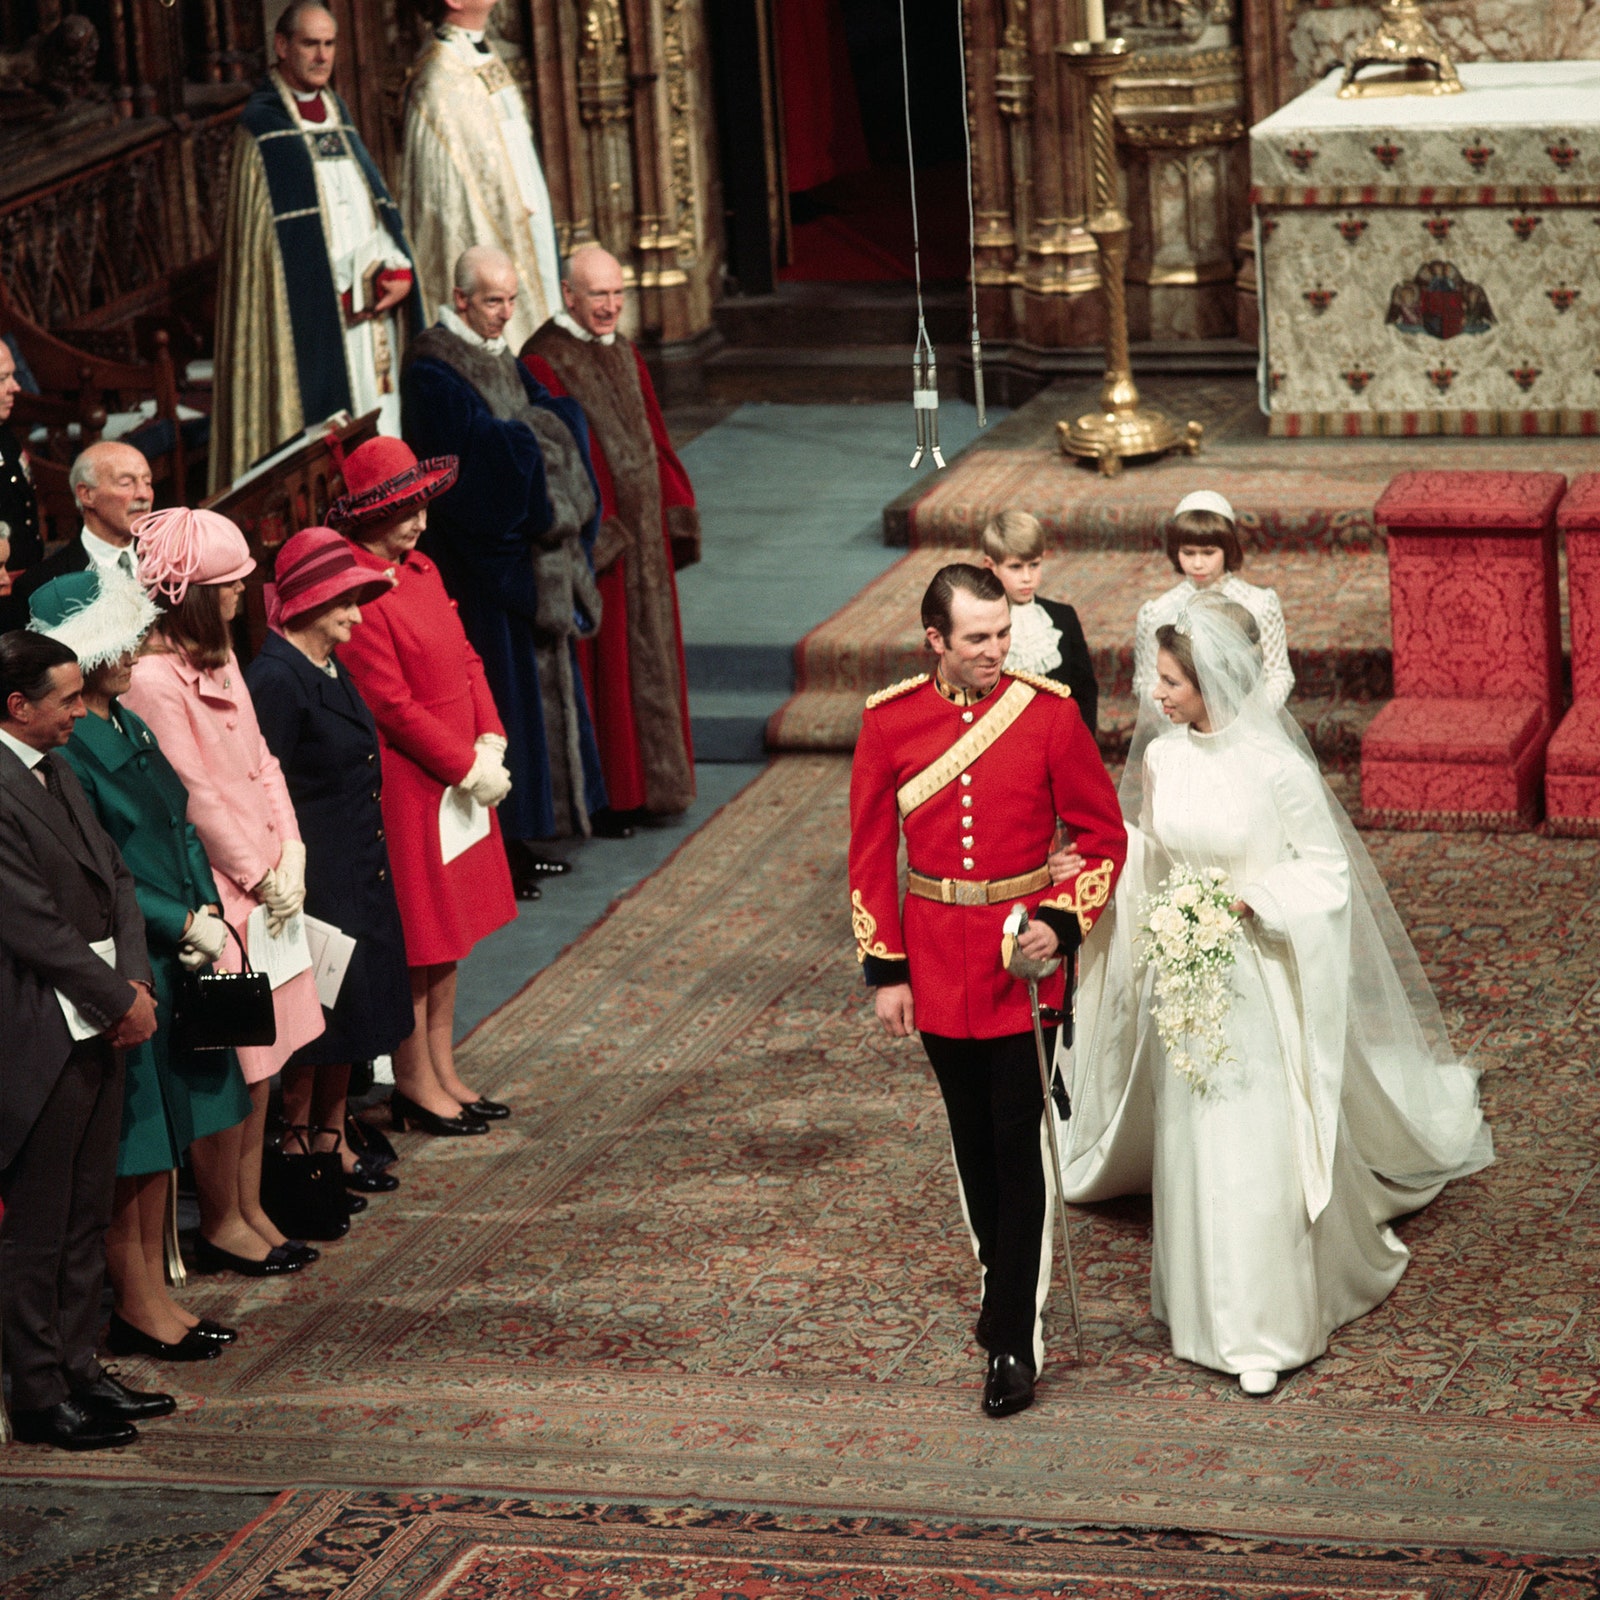 Princes Anne and Captain Mark Phillips walk down the aisle together after being married at Westminster Cathedral 1973